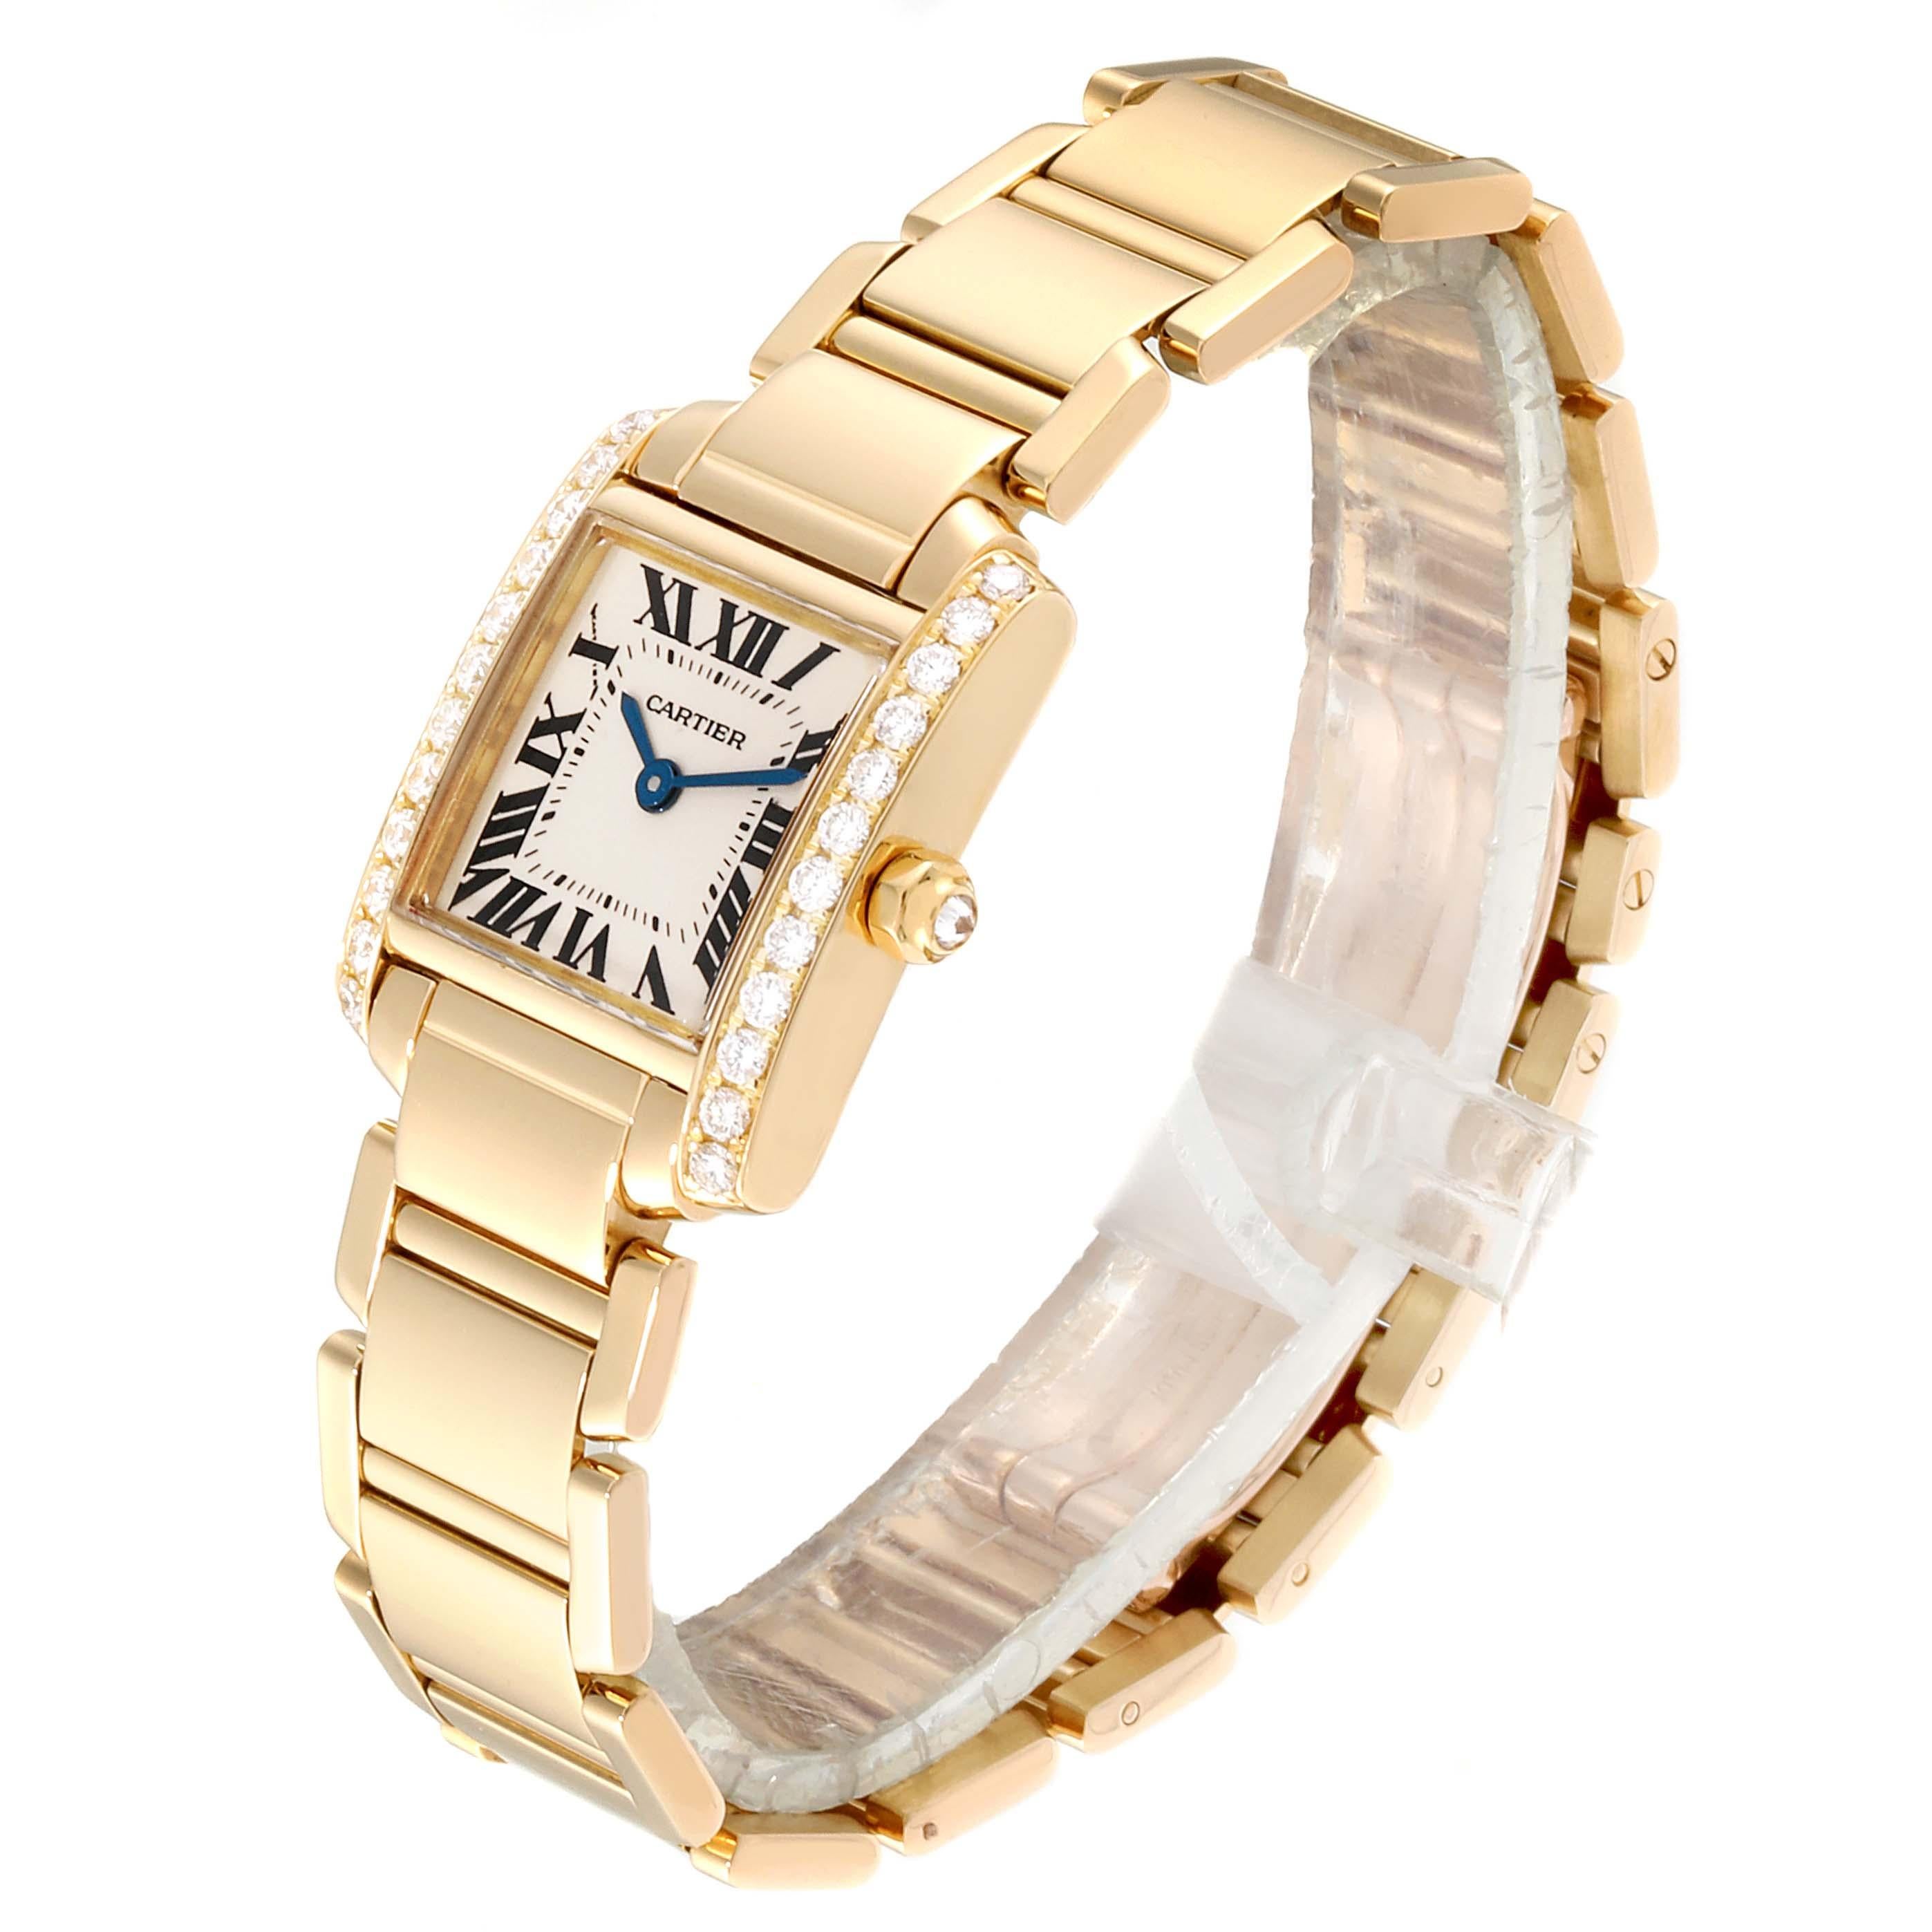 Cartier Tank Francaise 18 Karat Yellow Gold Diamond Ladies Watch WE1001R8 In Excellent Condition For Sale In Atlanta, GA